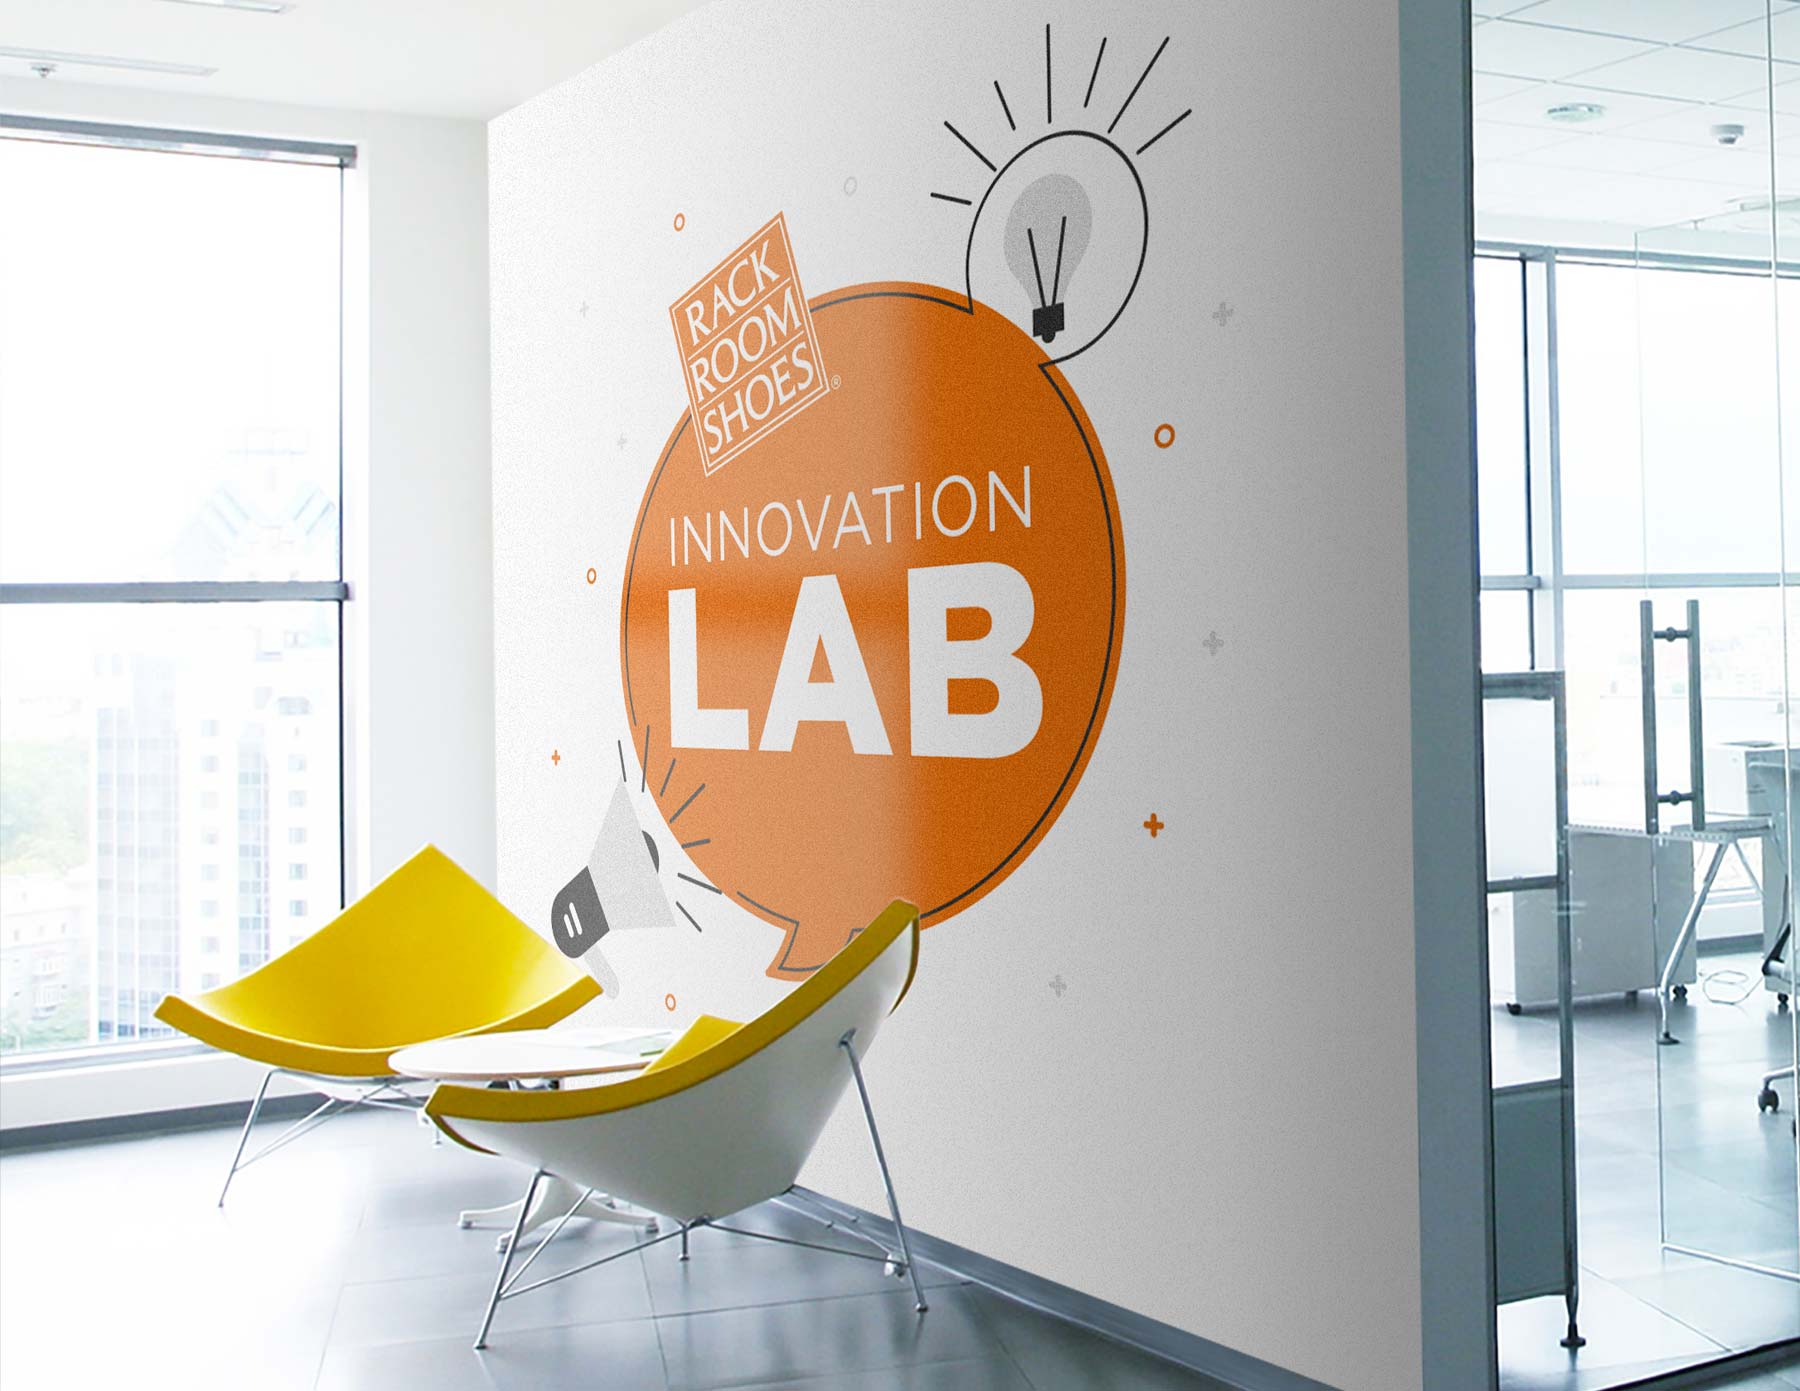 a very modern office setting with the innovation lab logo painted on the wall